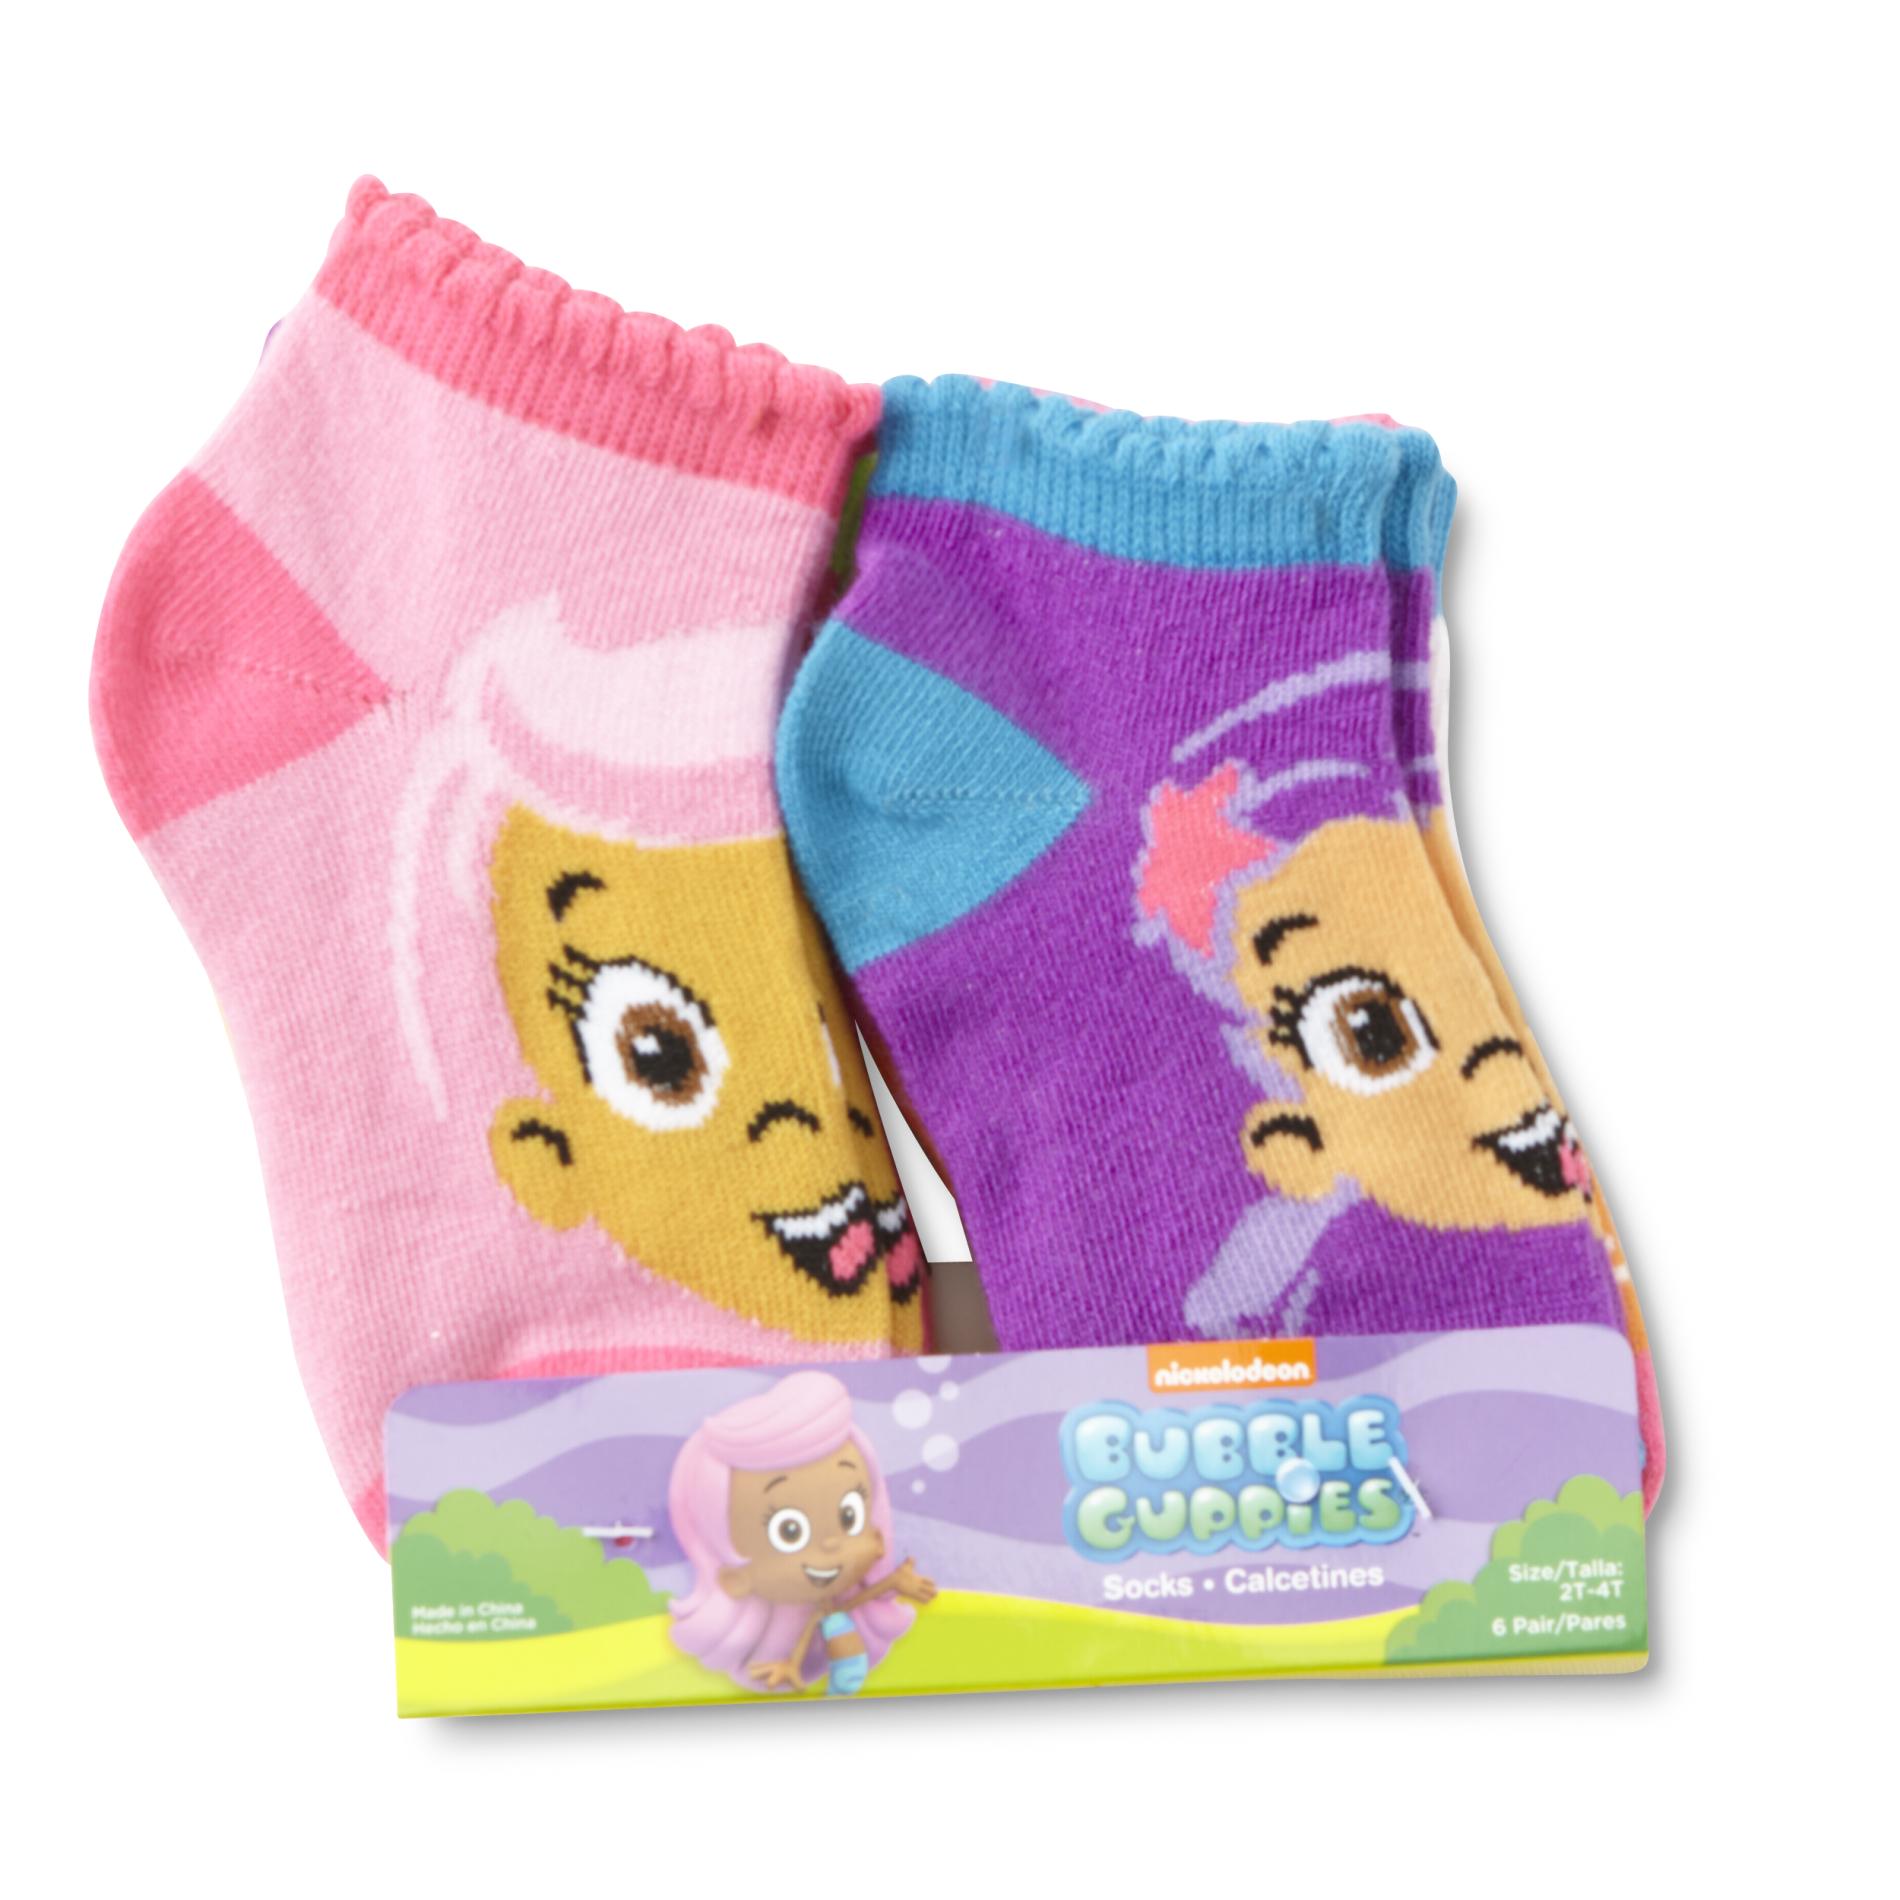 Where can you find Bubble Guppies merchandise?